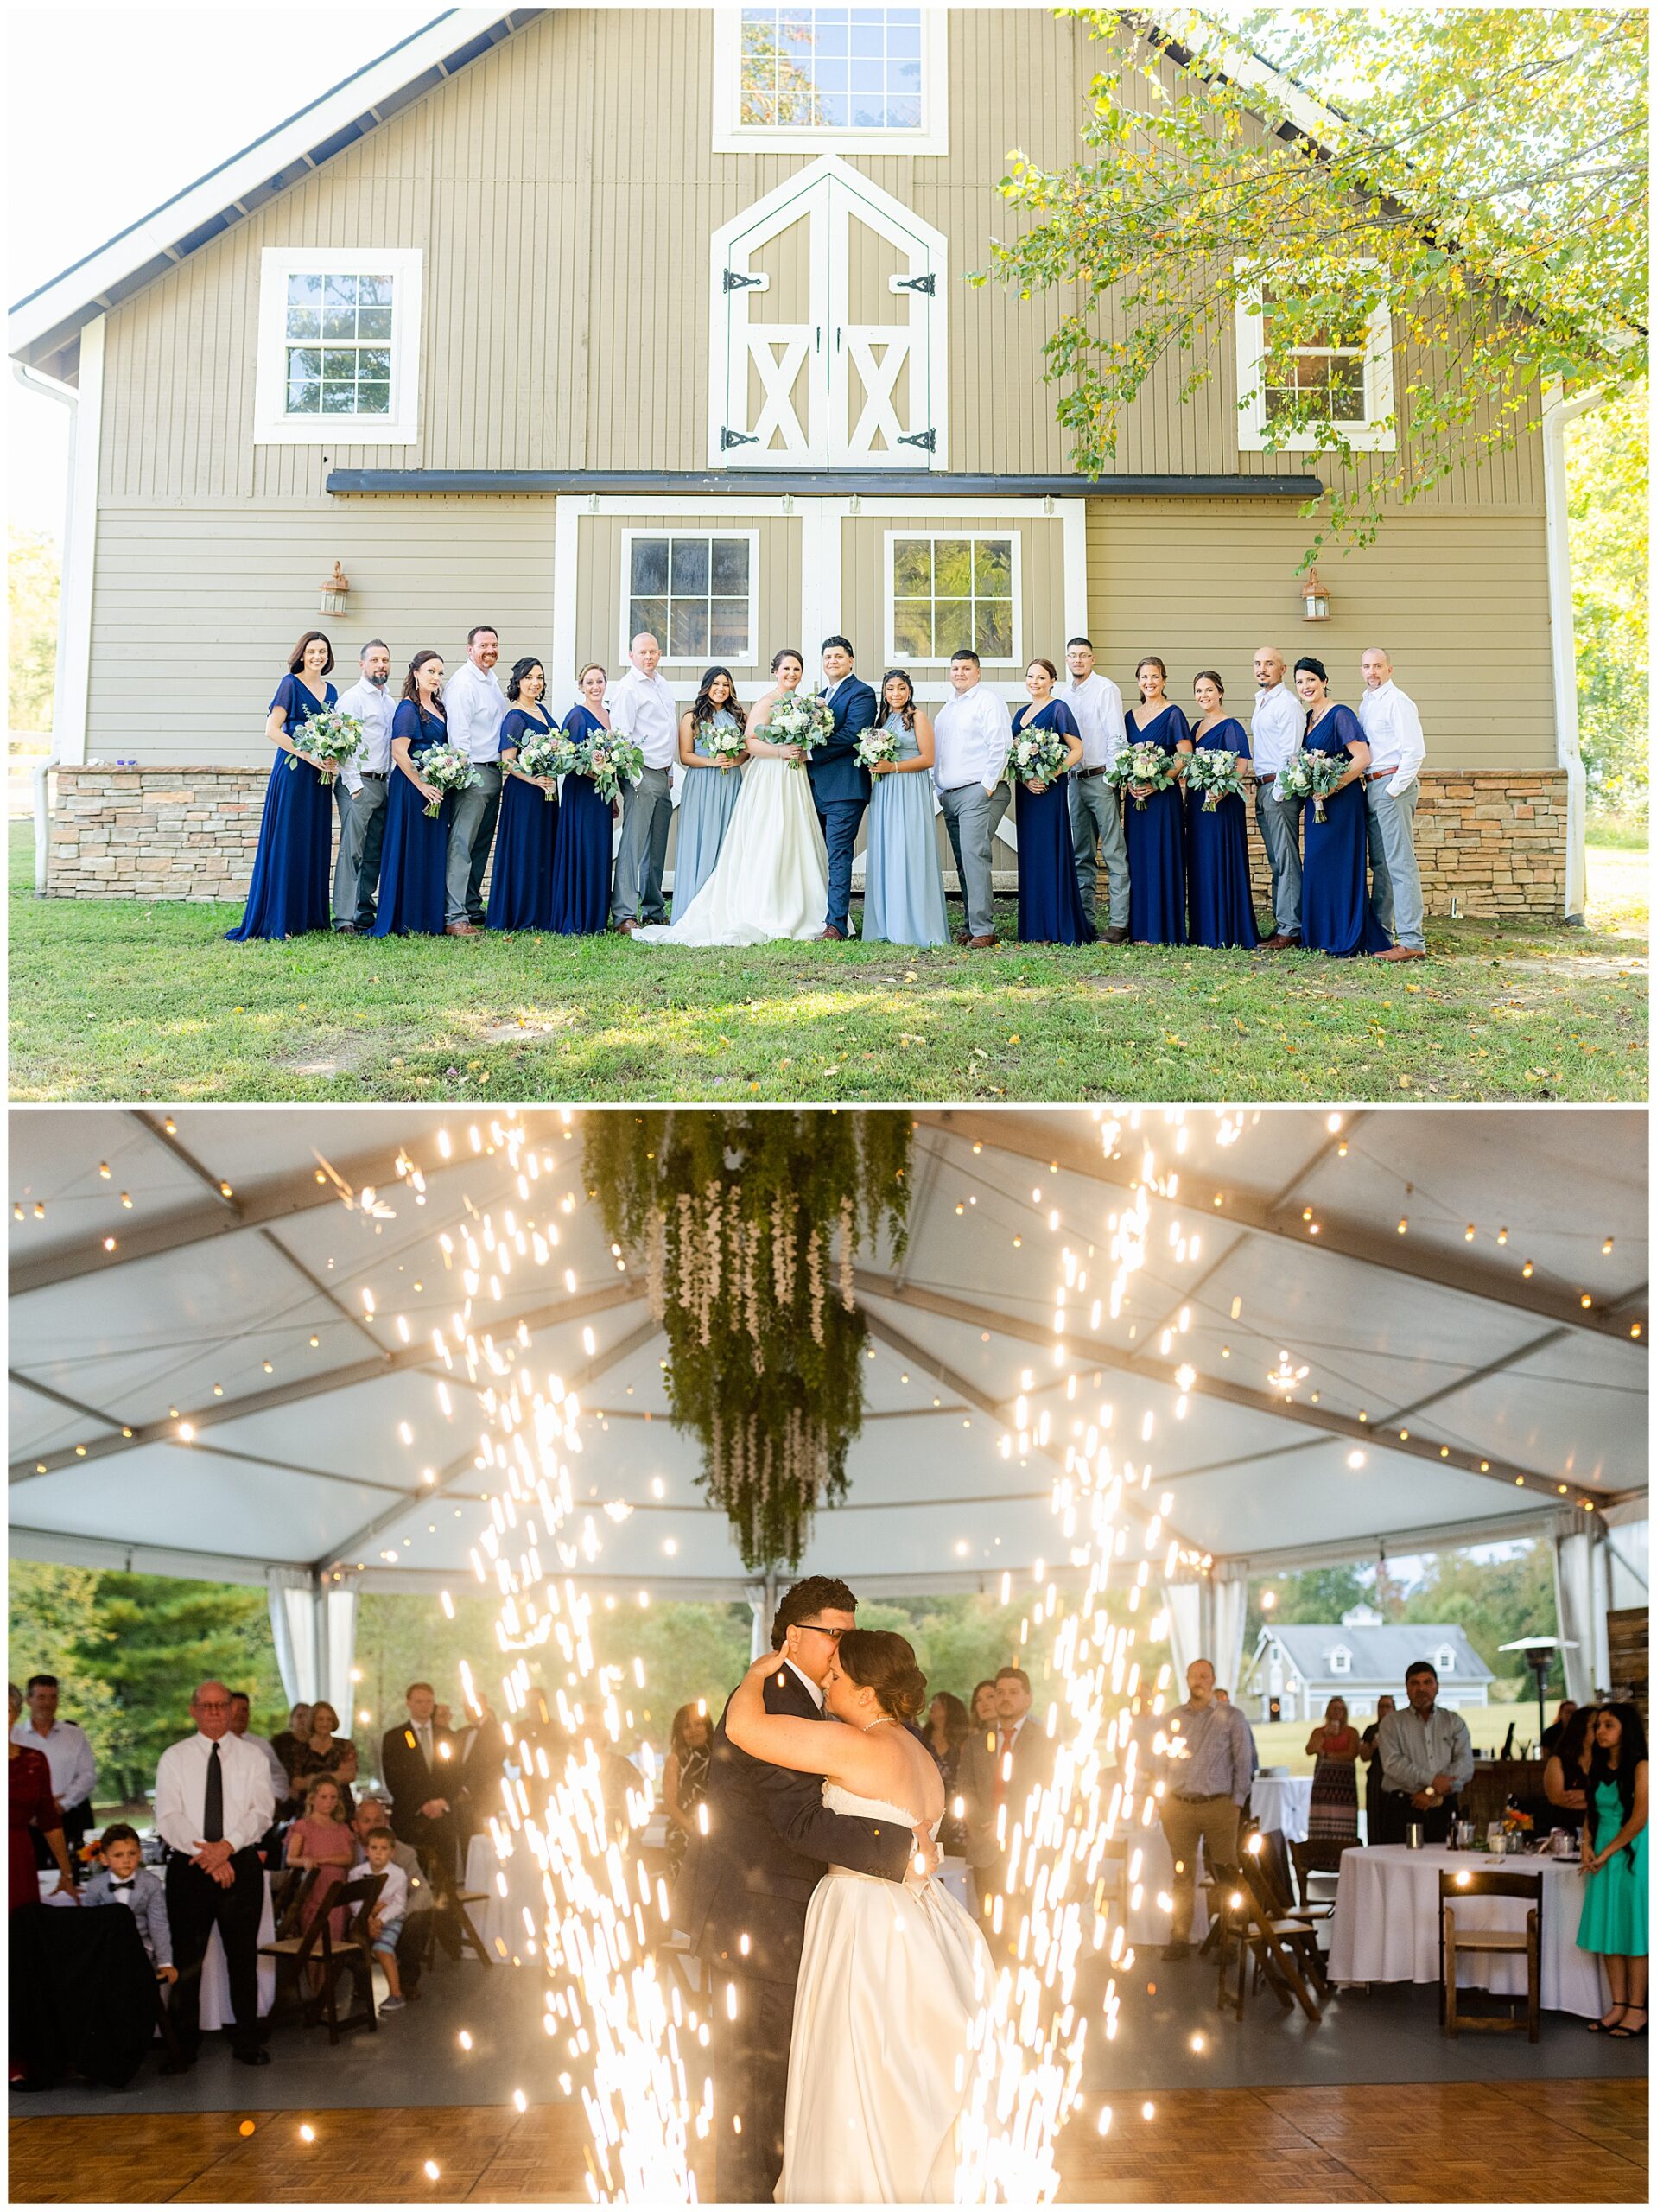 Newlyweds dance under a white tent surrounded by guests and pyrotechnics